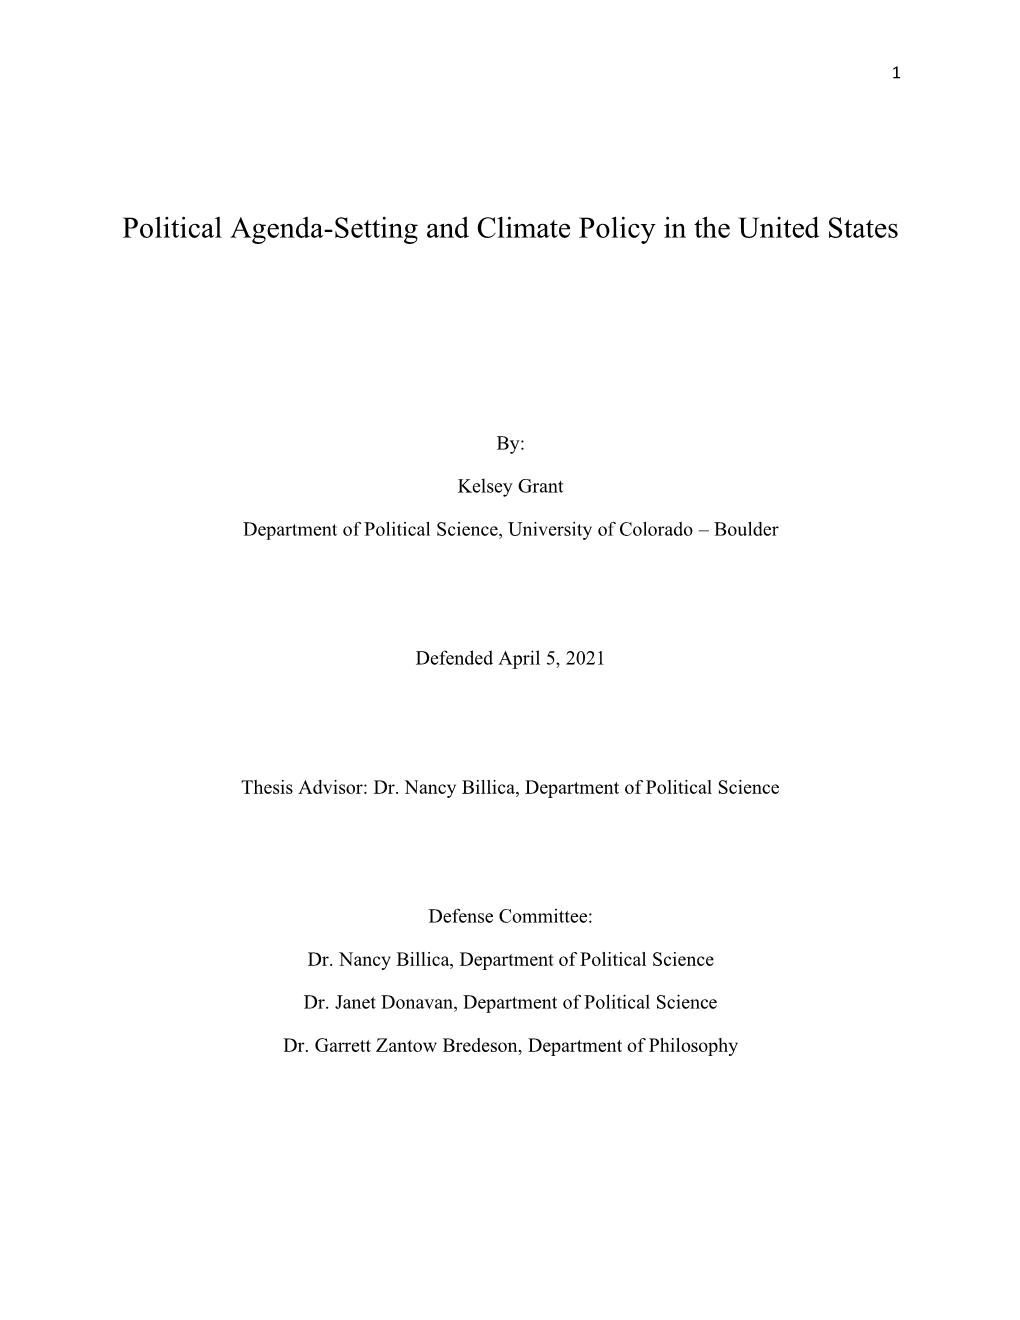 Political Agenda-Setting and Climate Policy in the United States